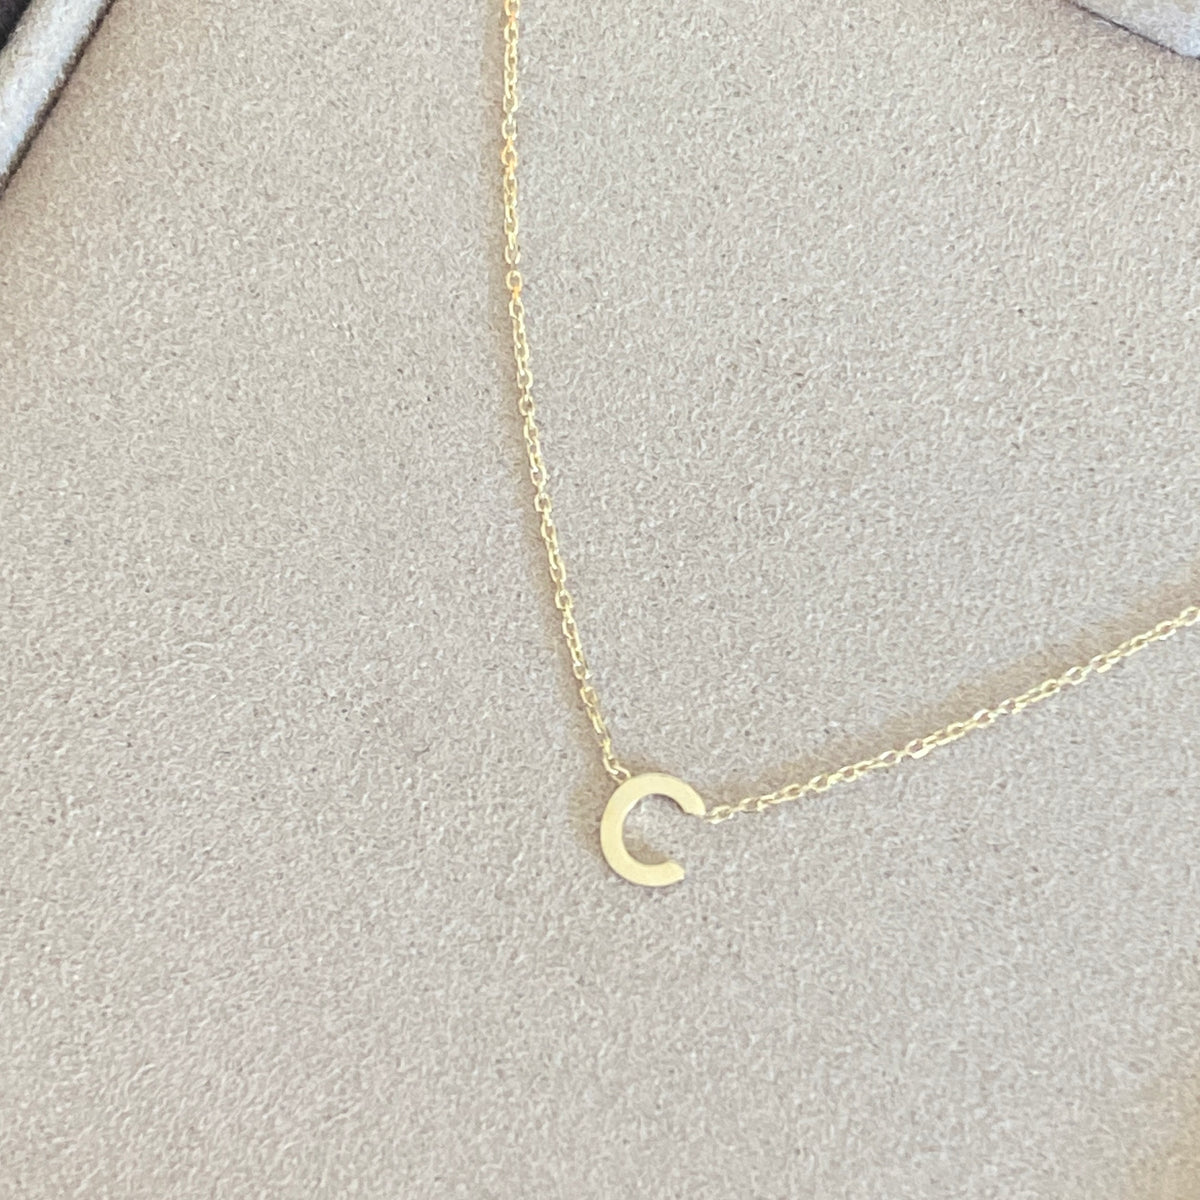 PETITE 'C' INITIAL NECKLACE | 9K SOLID GOLD